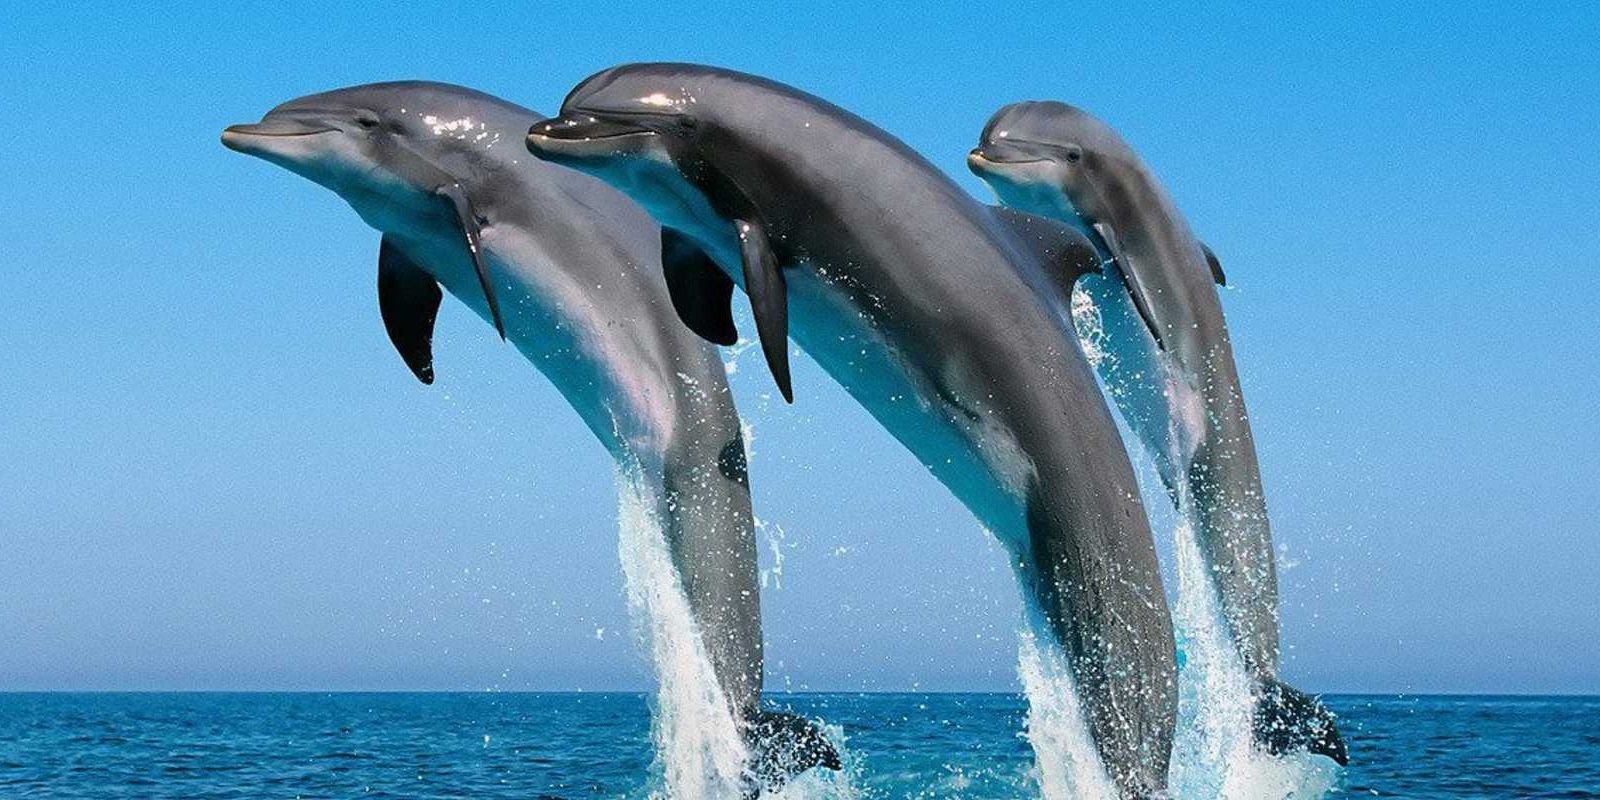 Dolphins leap out of the water in The Cove